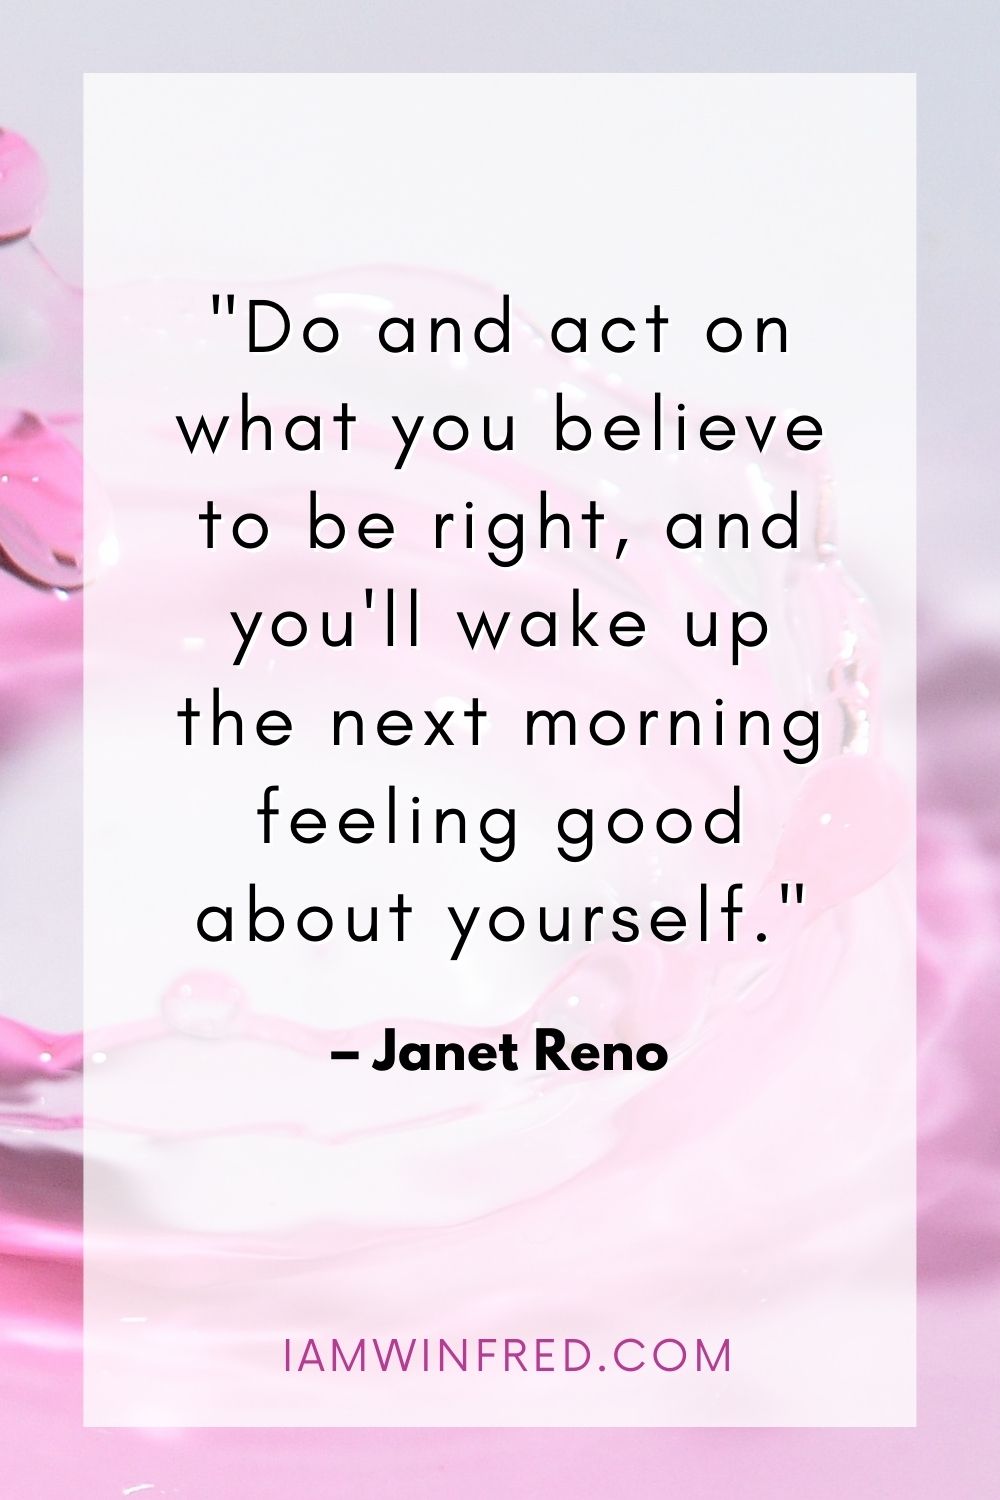 Do And Act On What You Believe To Be Right And Youll Wake Up The Next Morning Feeling Good About Yourself.